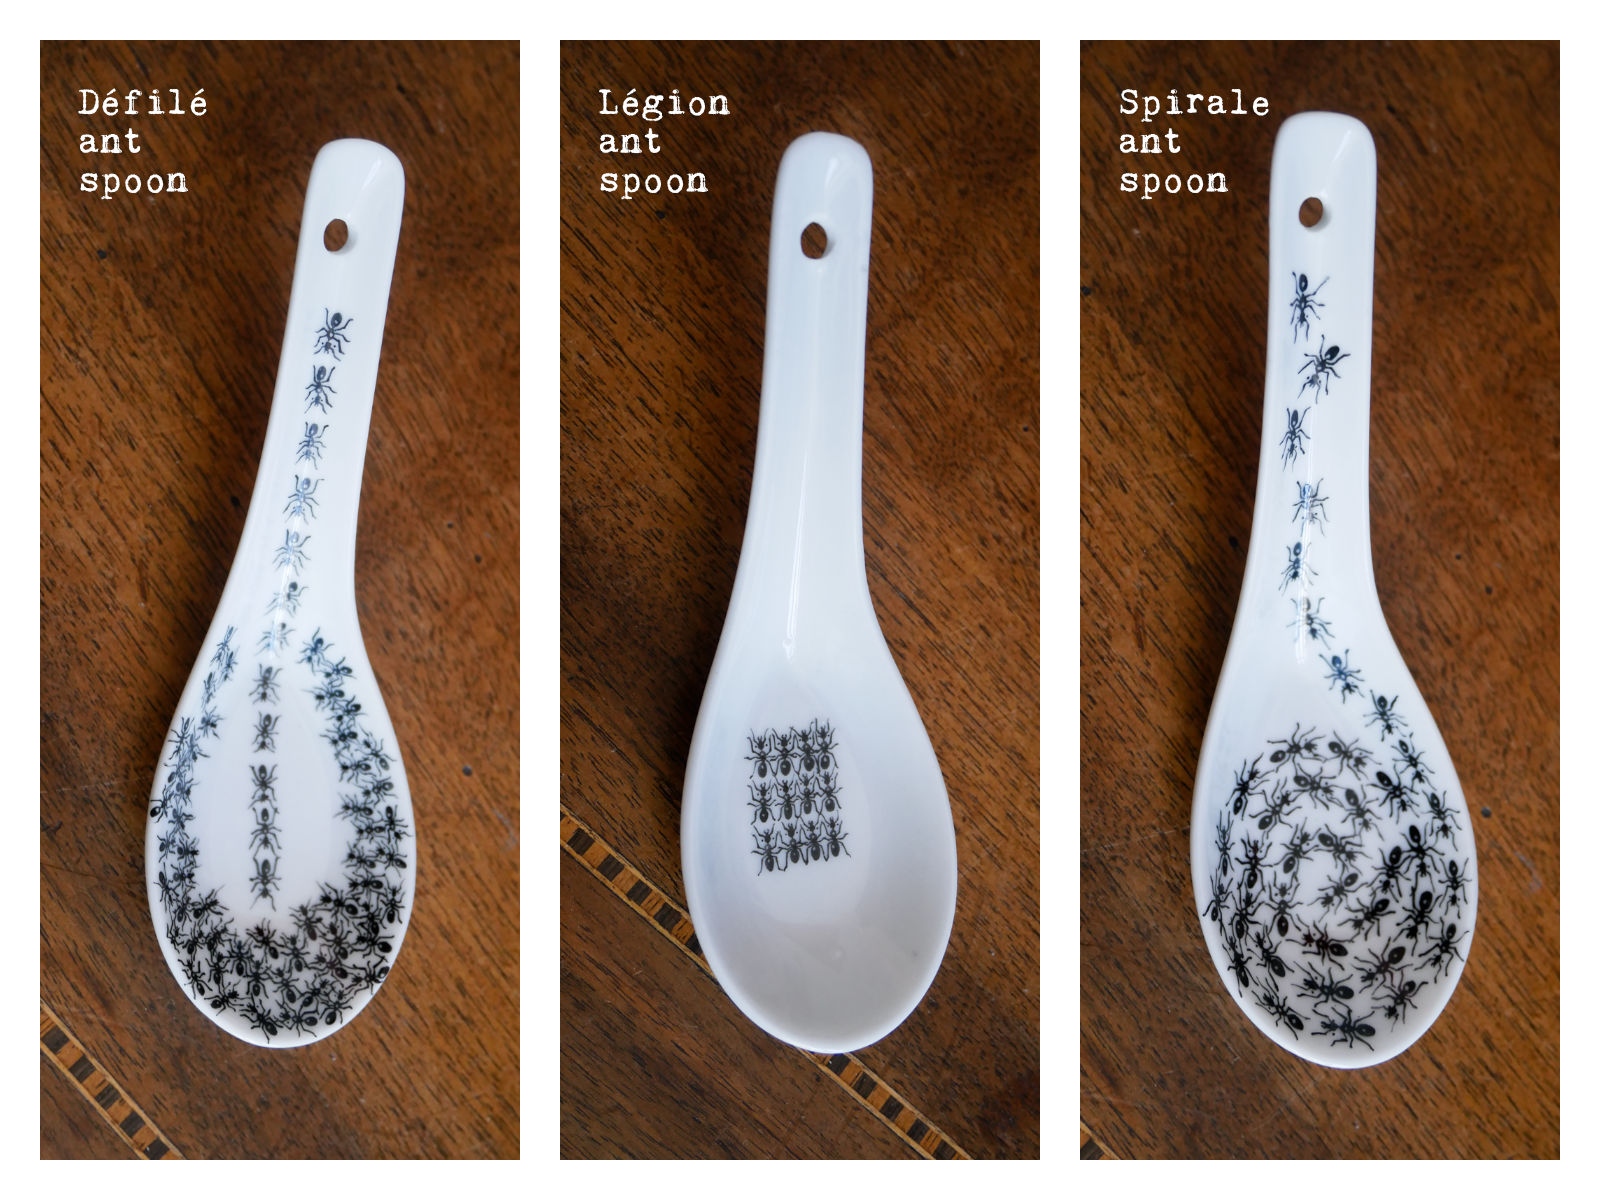 “Défilé”, “Légion” and “Spirale” spoons from “Fourmis”, a collection of painted porcelains by messalyn.